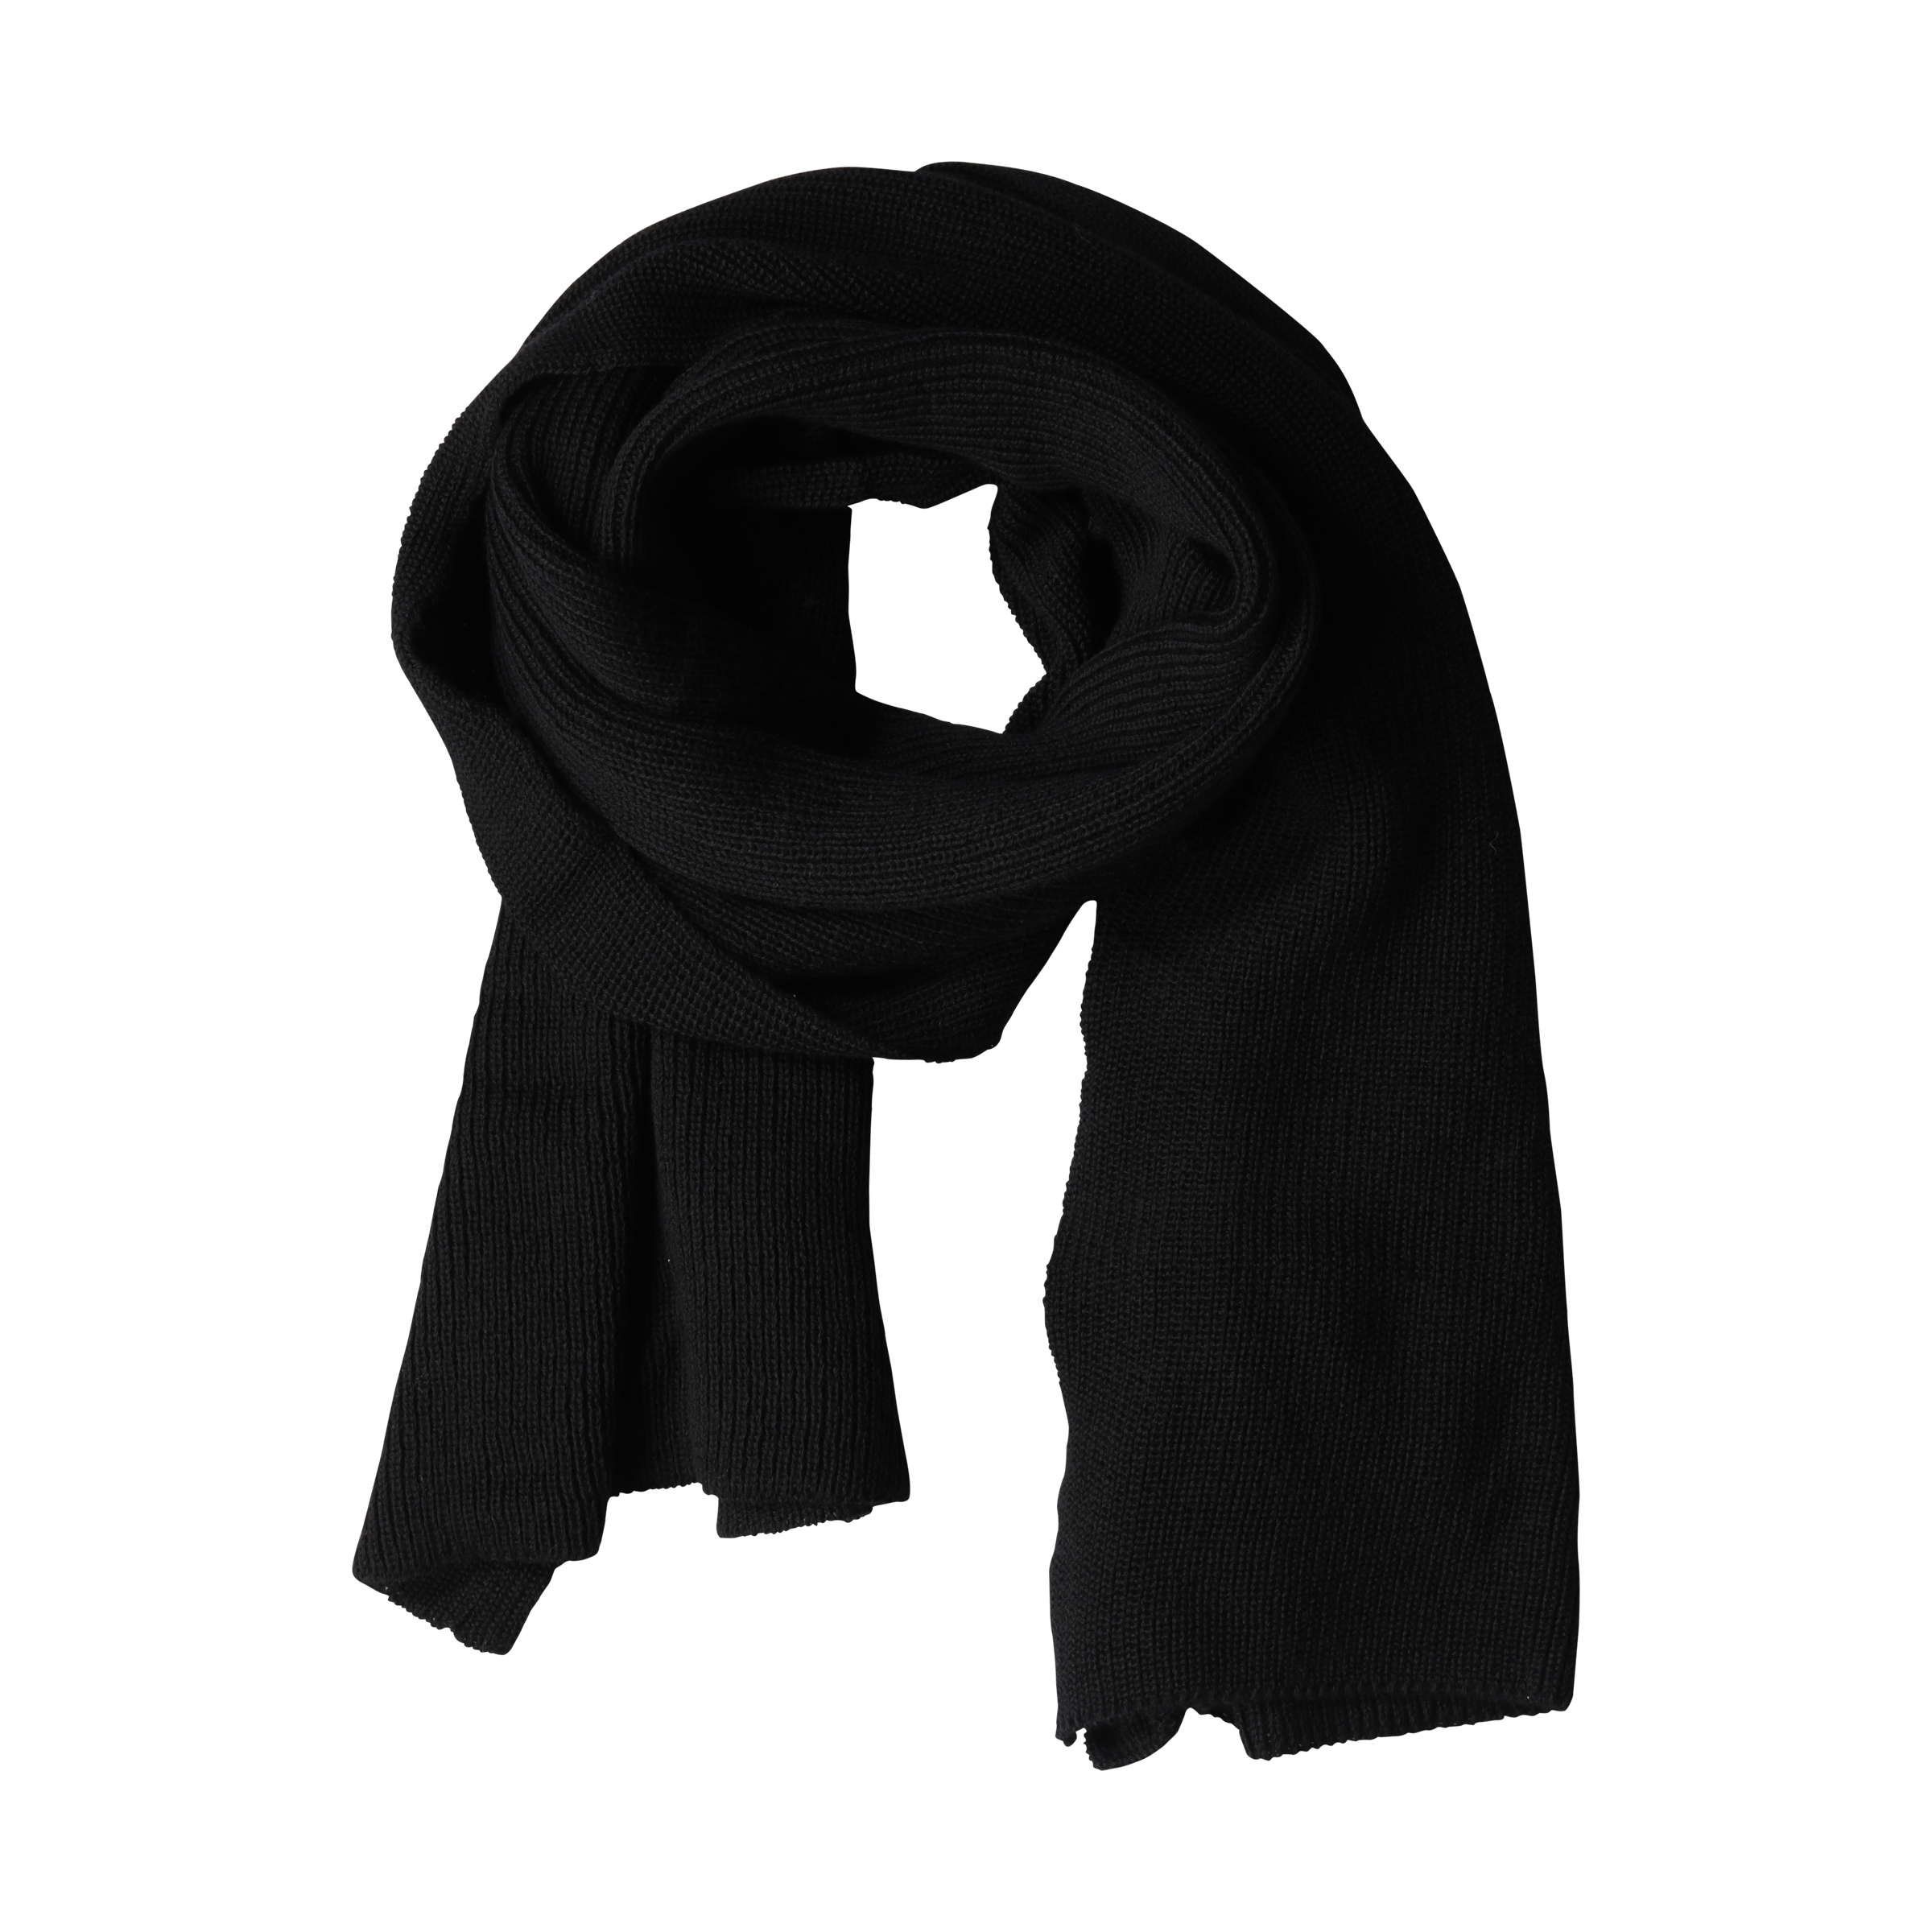 HANNES ROETHER Knit Scarf in Black